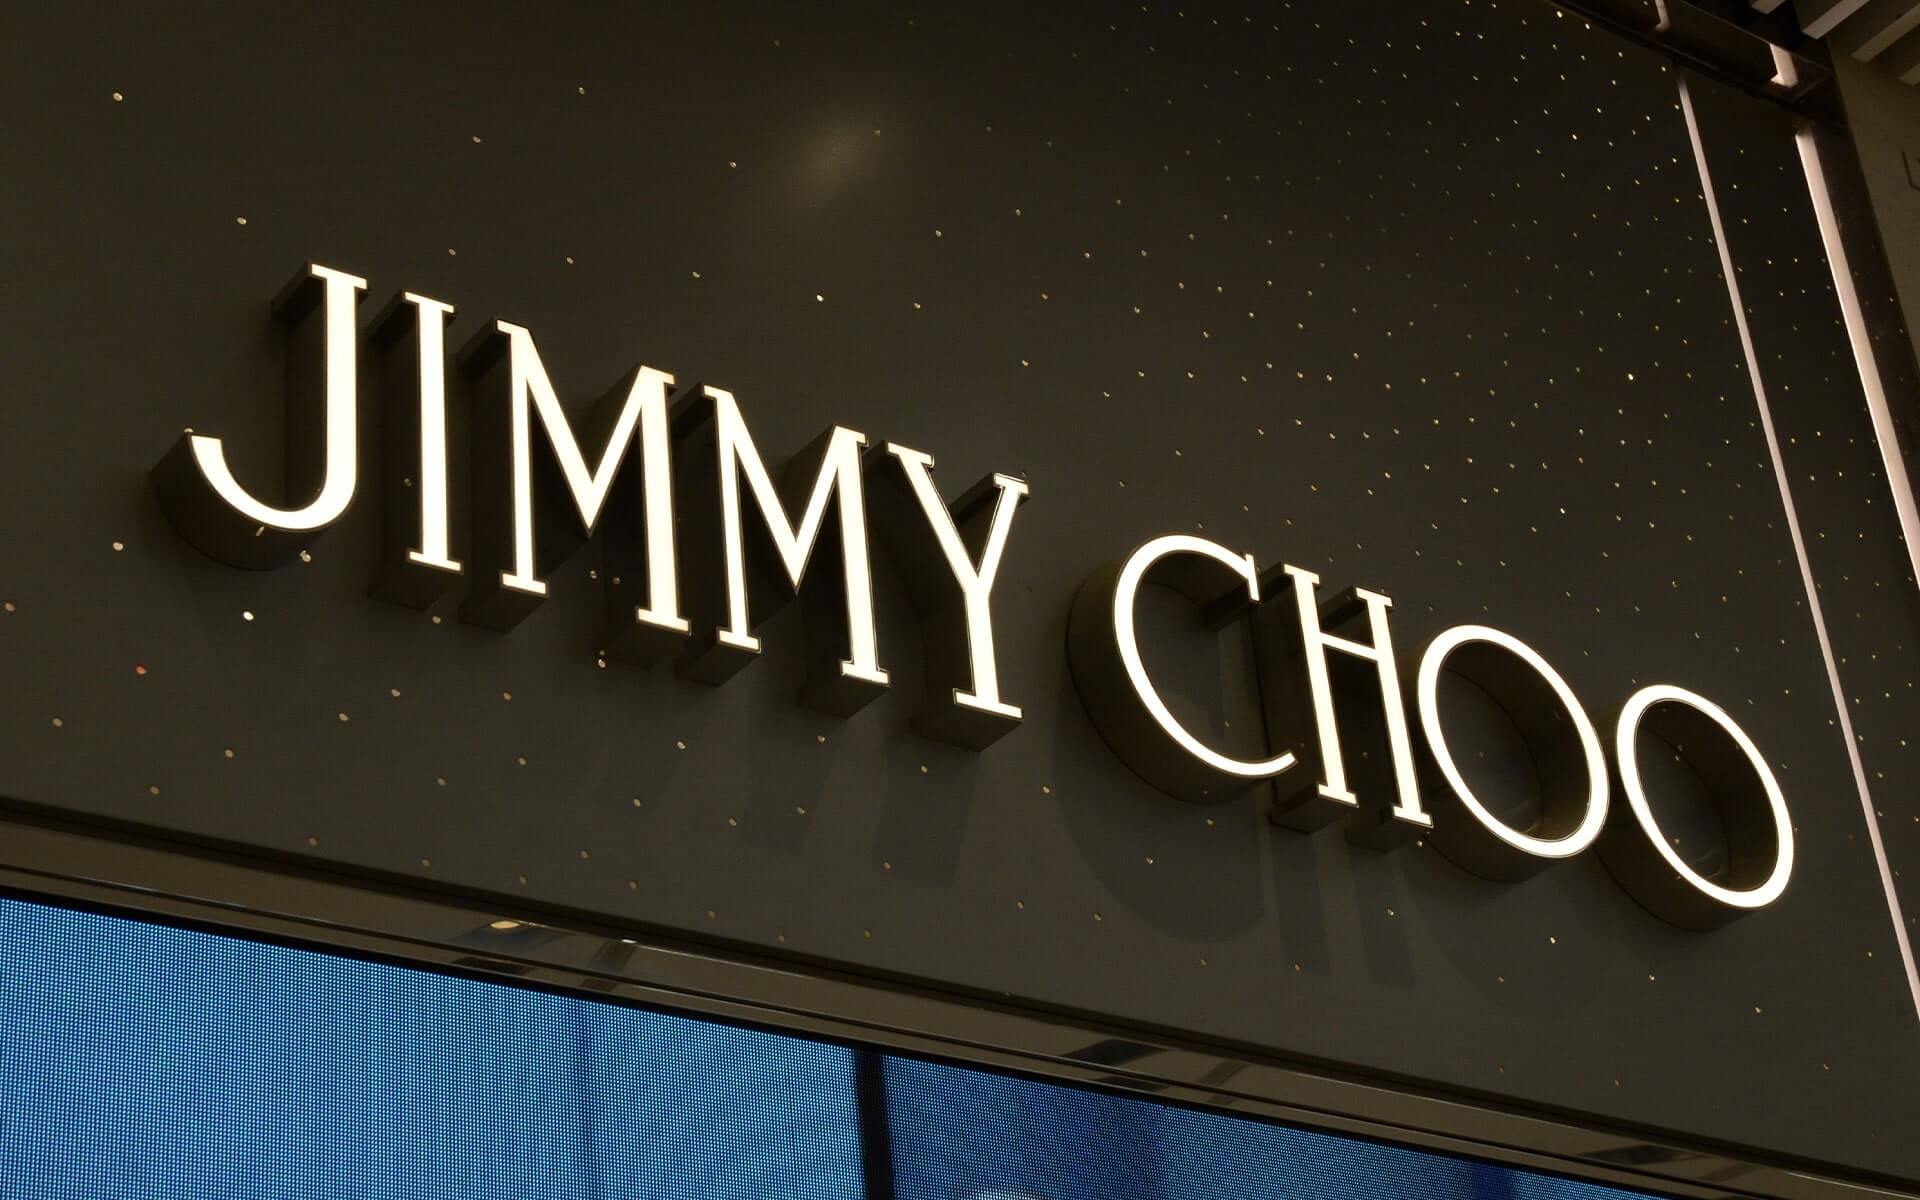 Trim Face-lit Metal Channel Letters for Jimmy Choo